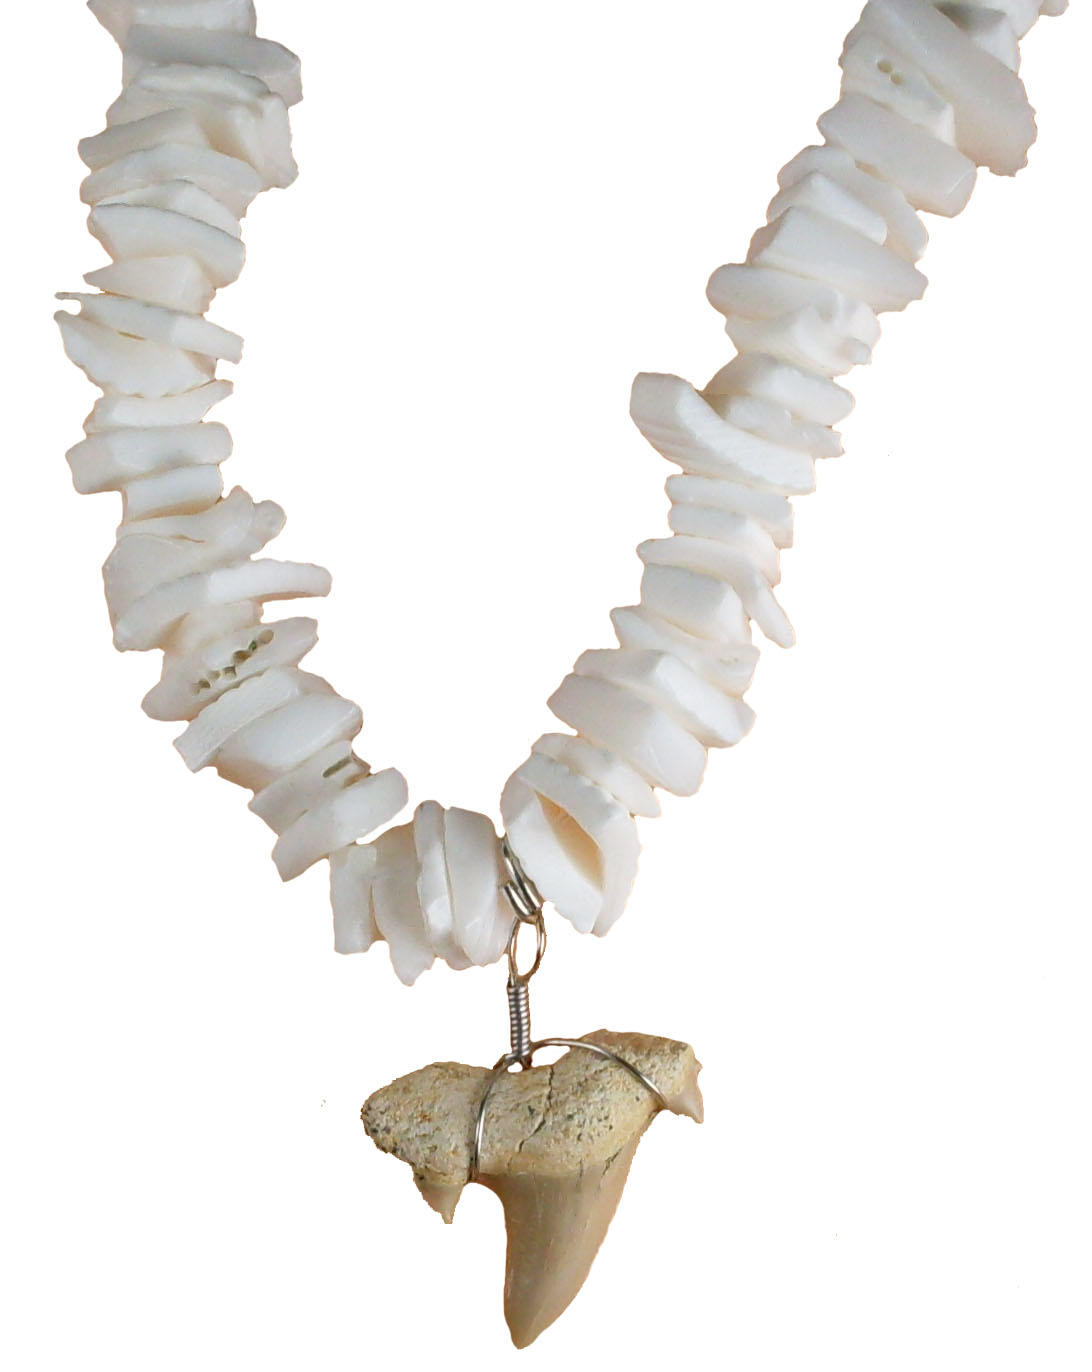 Shark Tooth Necklace #4